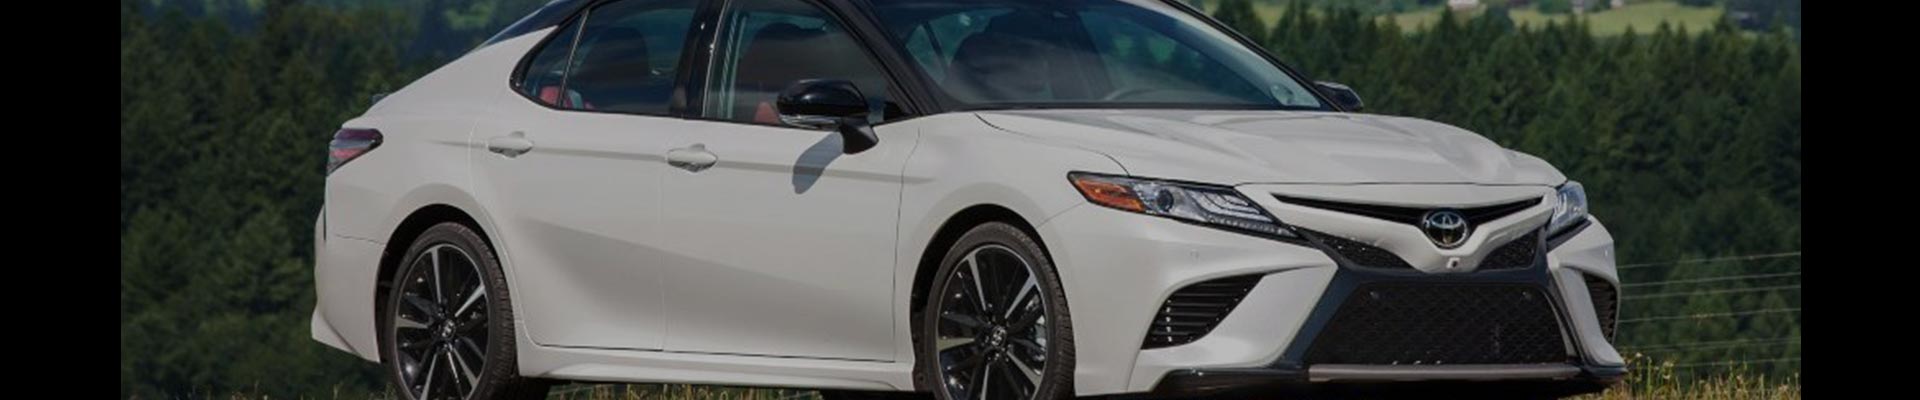 Shop Genuine OE Parts for Toyota Camry